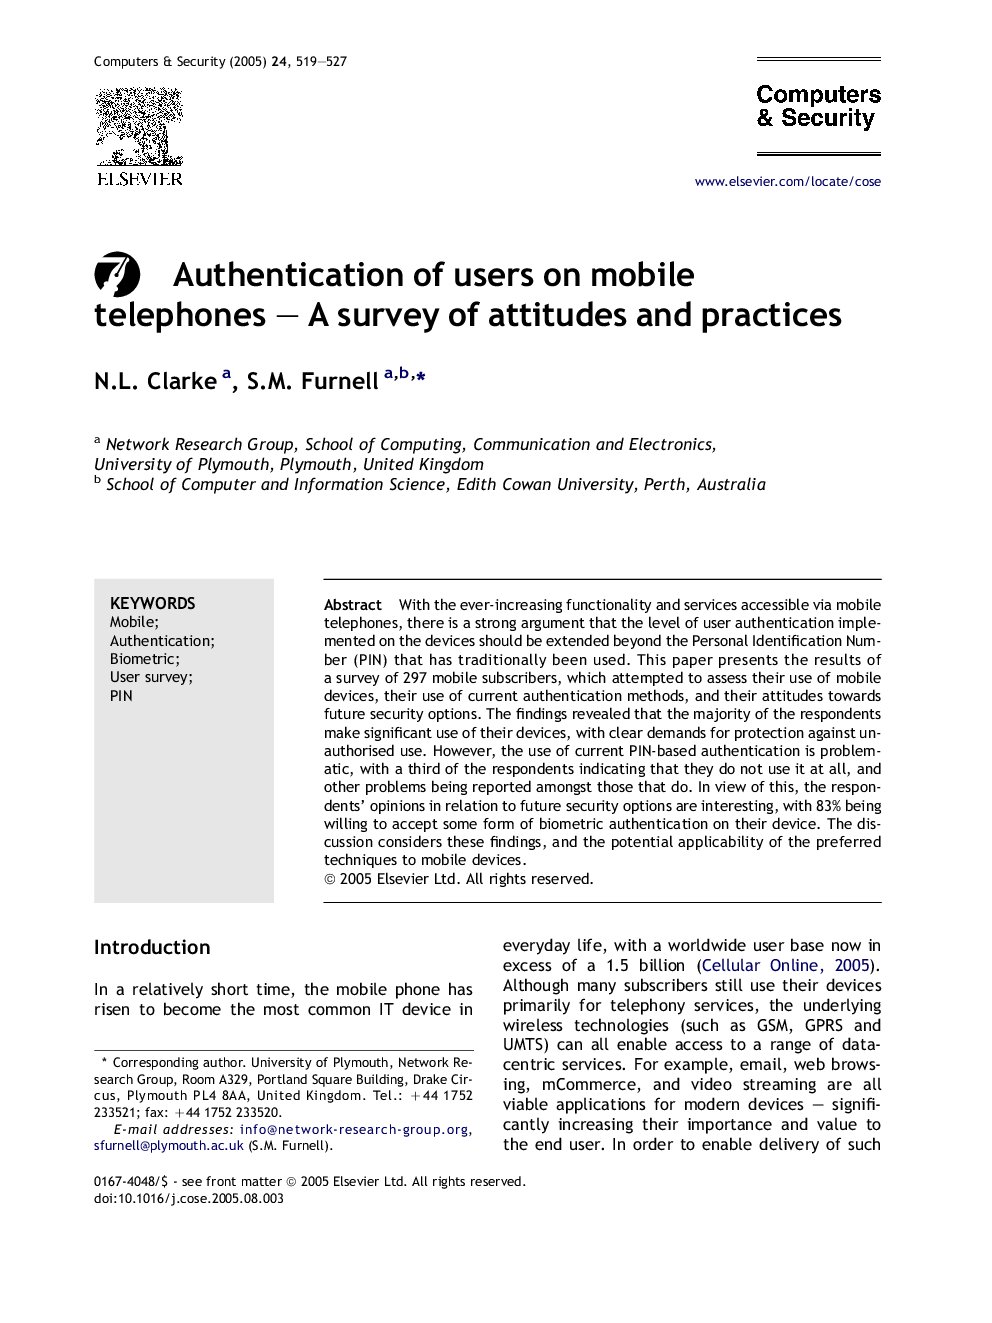 Authentication of users on mobile telephones - A survey of attitudes and practices